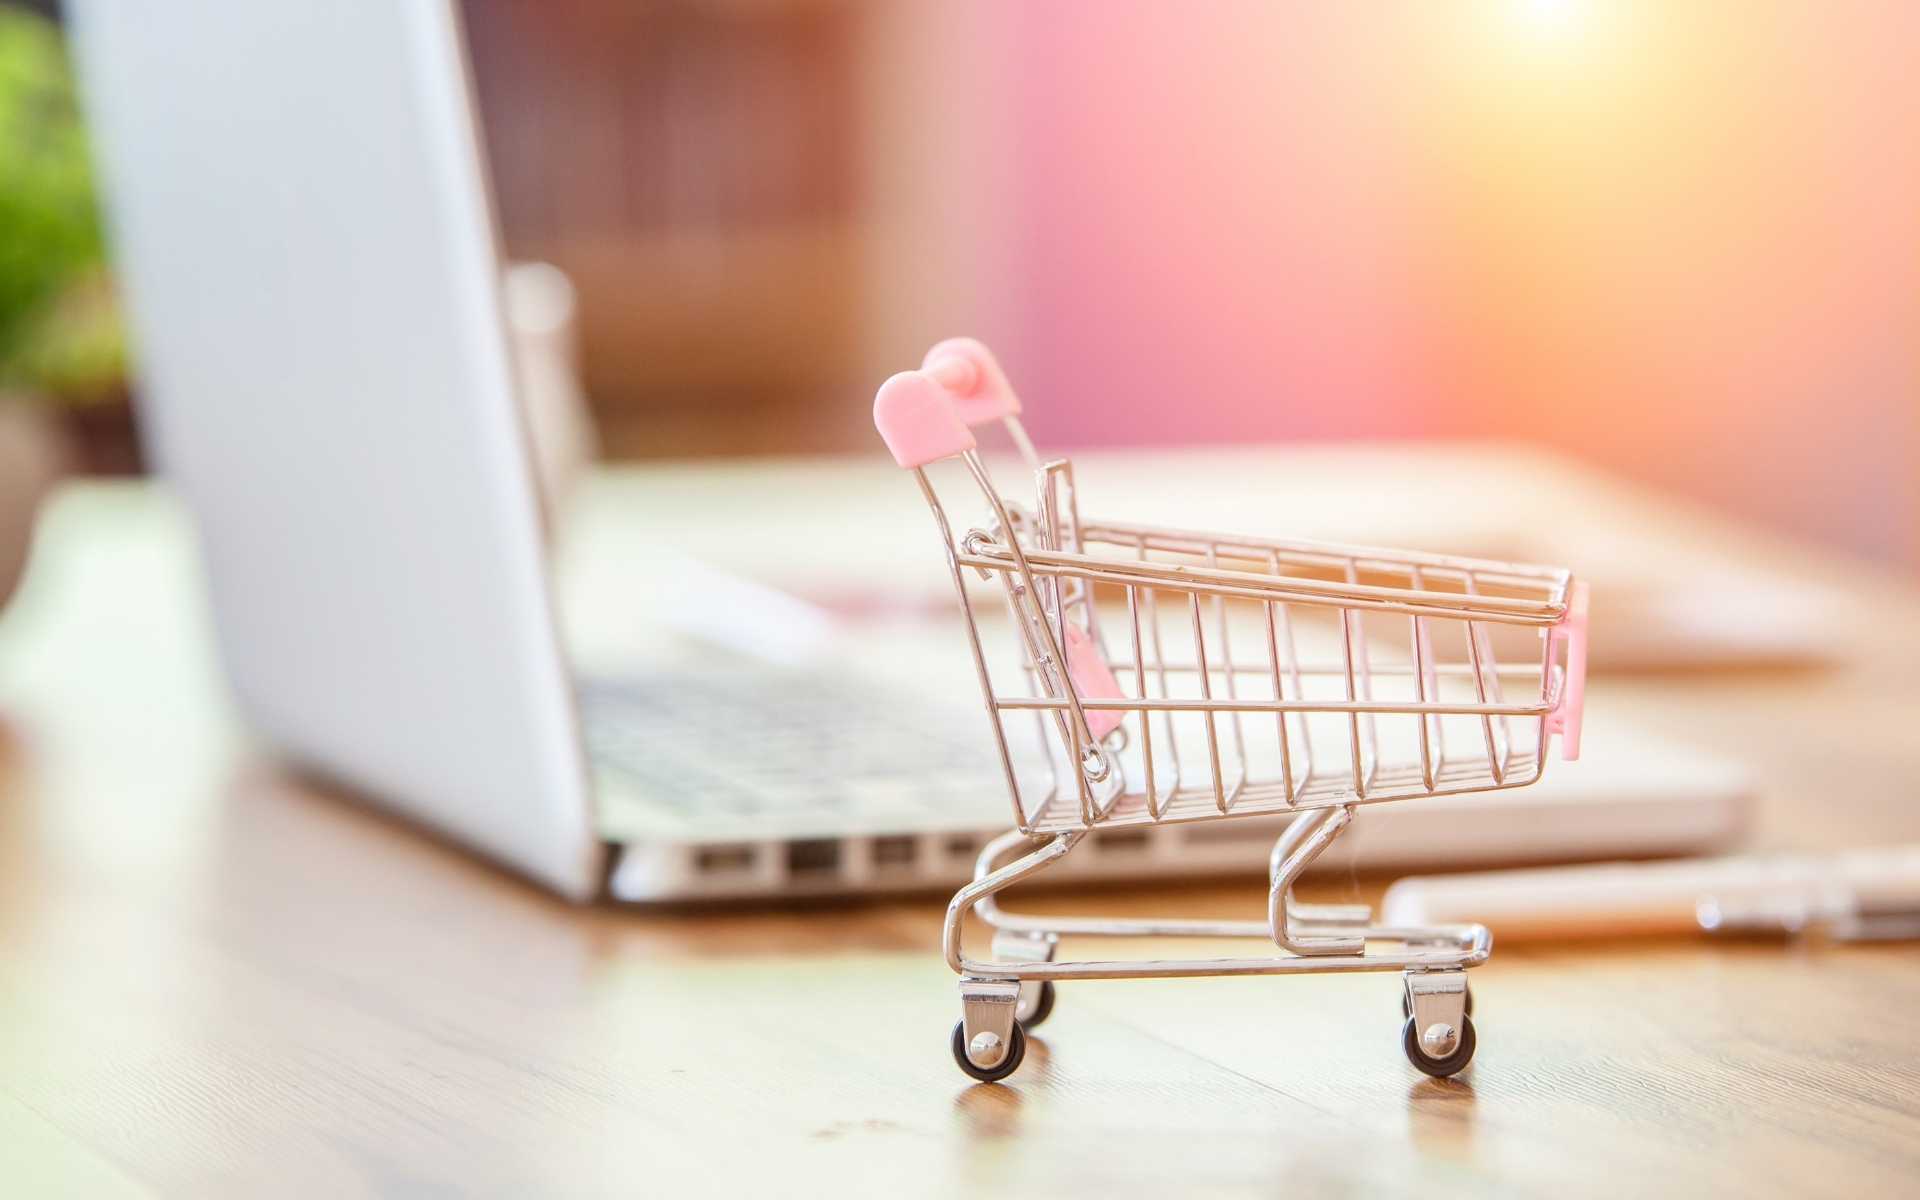 How to Build an Ecommerce Site in 2022 - 7 Simple Steps